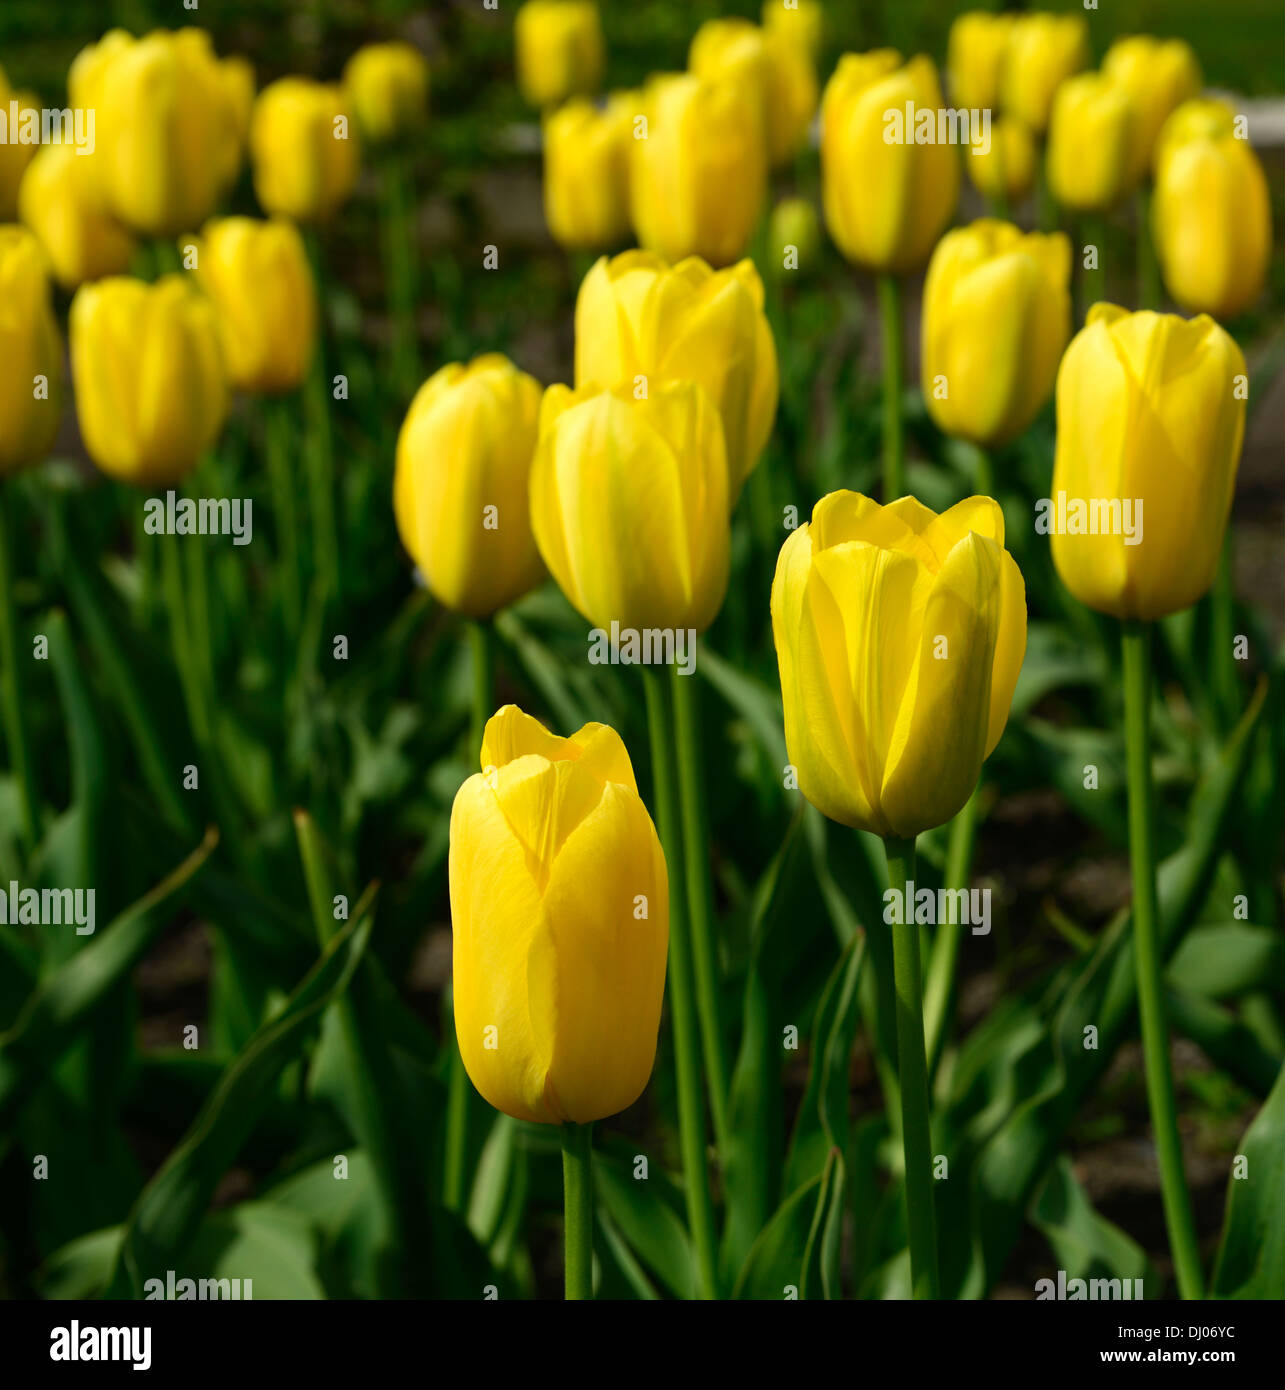 Tulipa Big Smile Colours Colors Bright Yellow Flowers Flowering Stock Photo Alamy